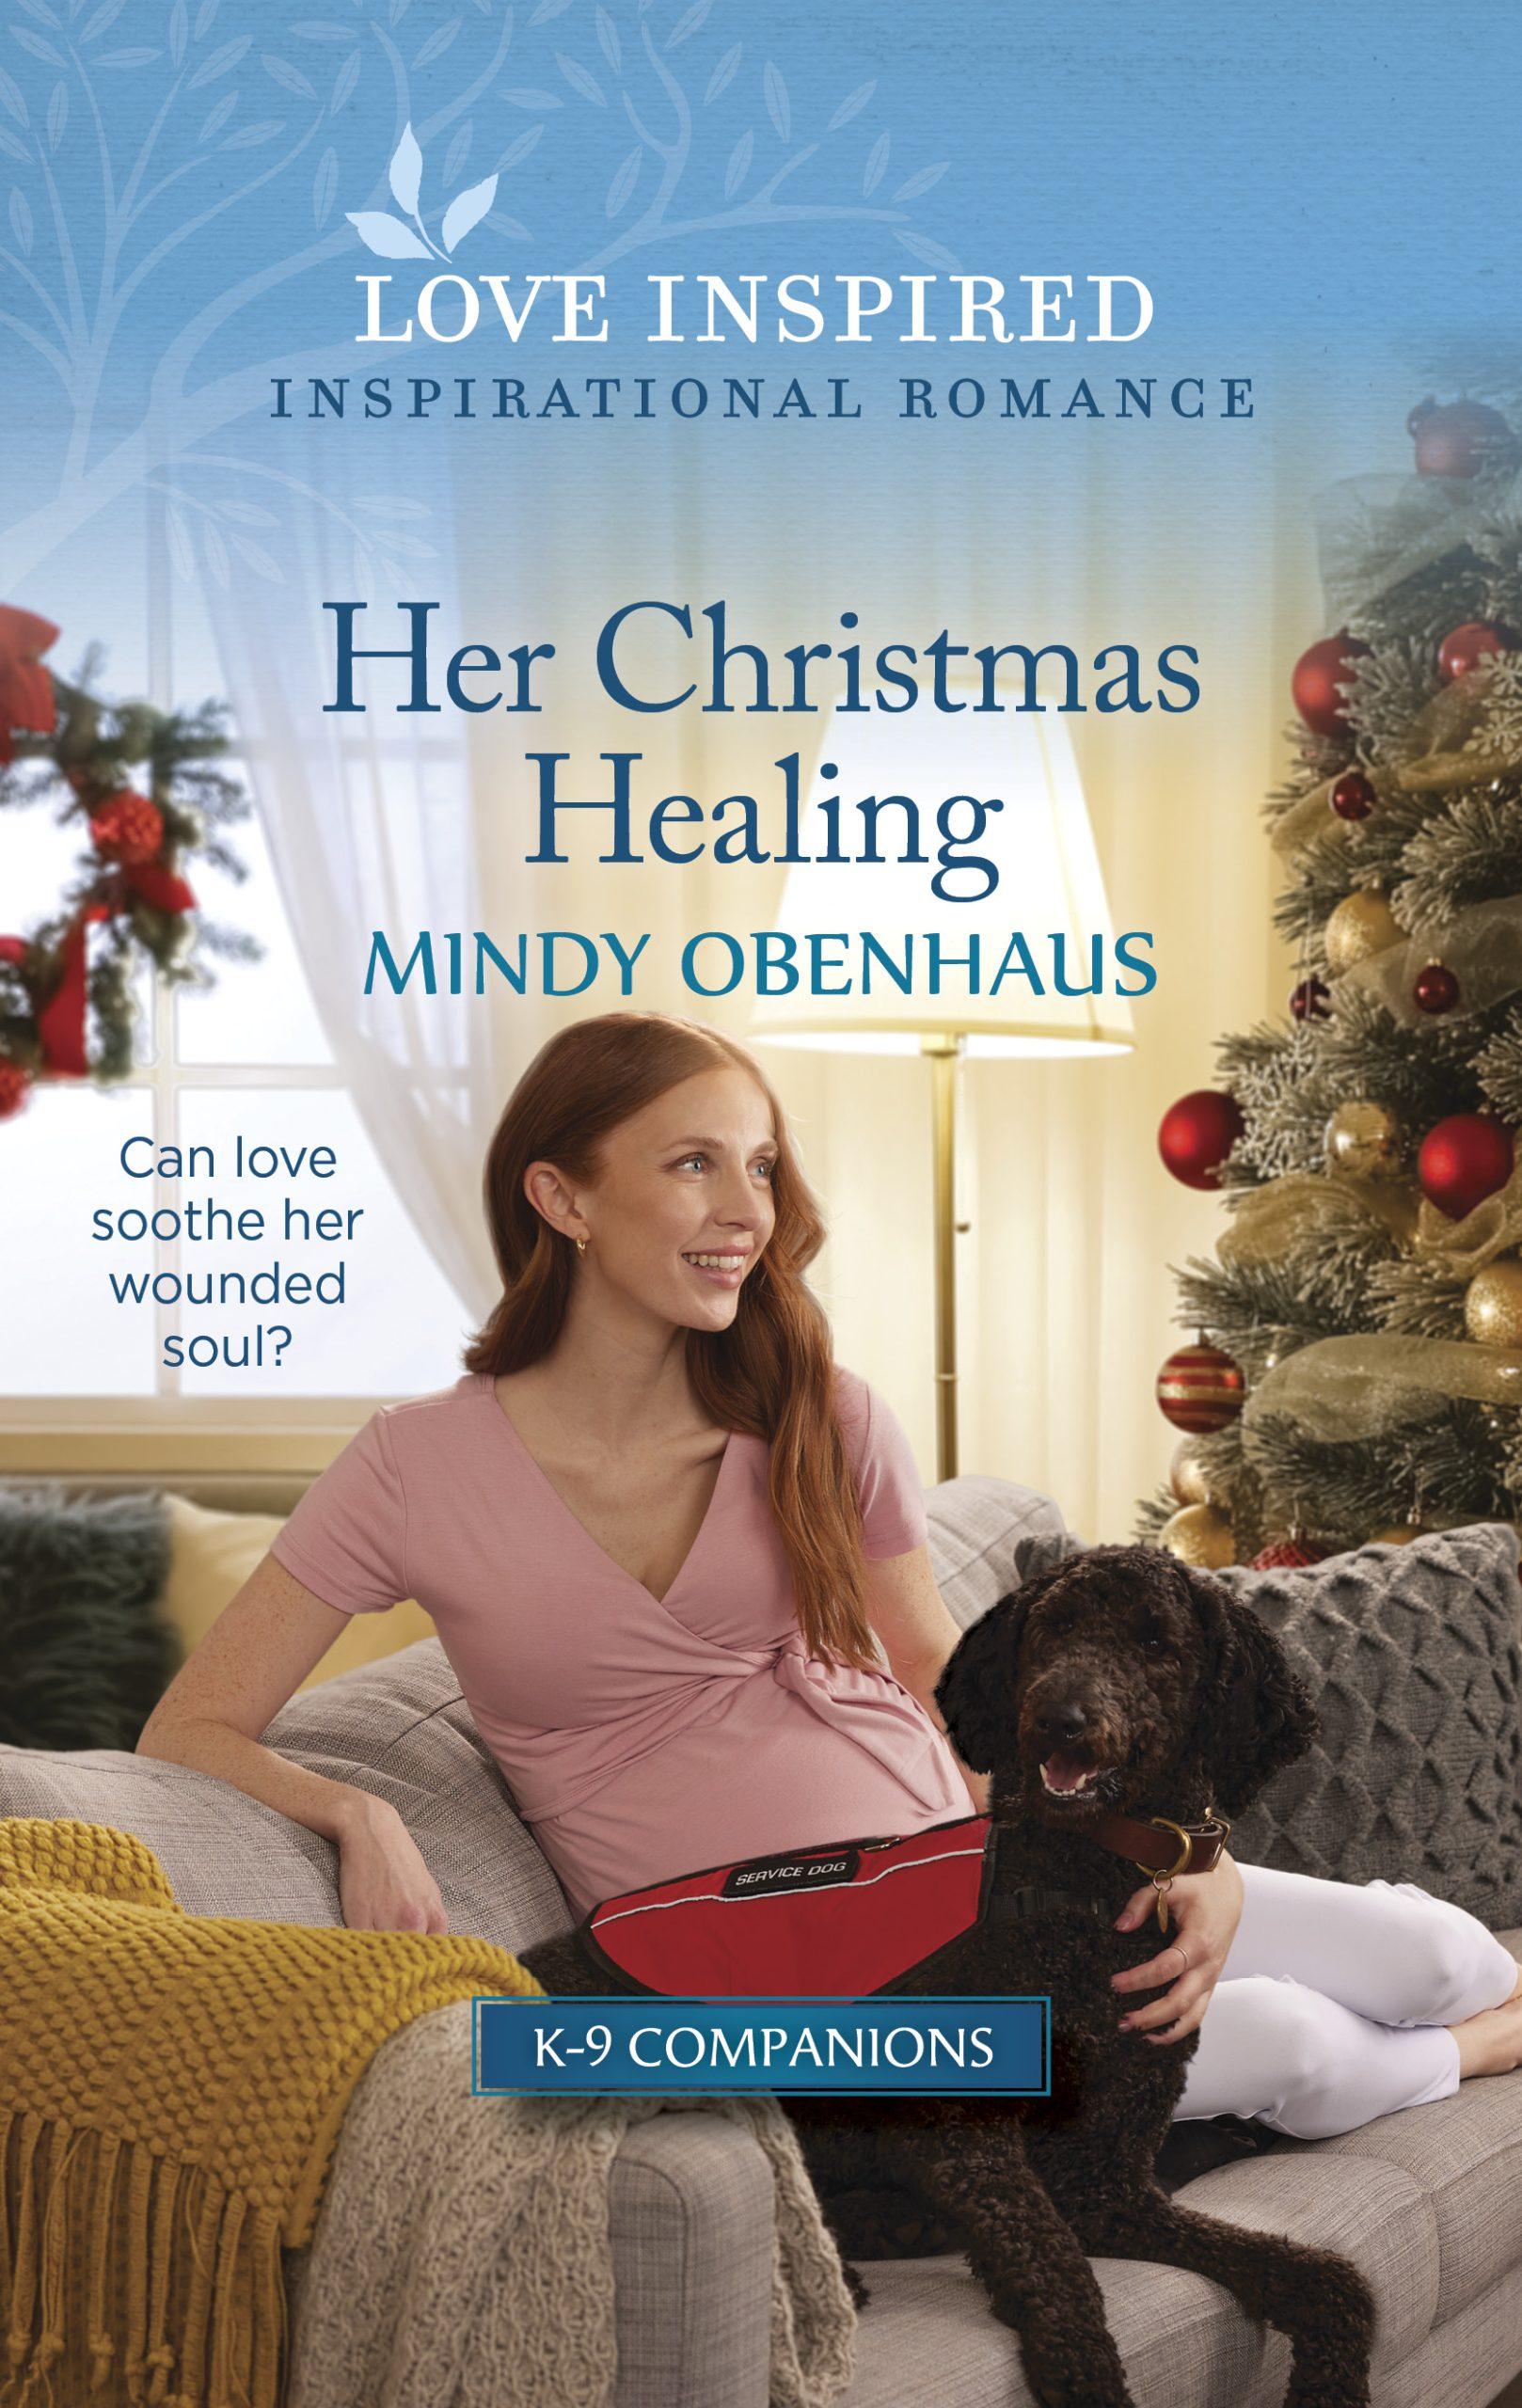 A Christmas Bargain by author Mindy Obenhaus